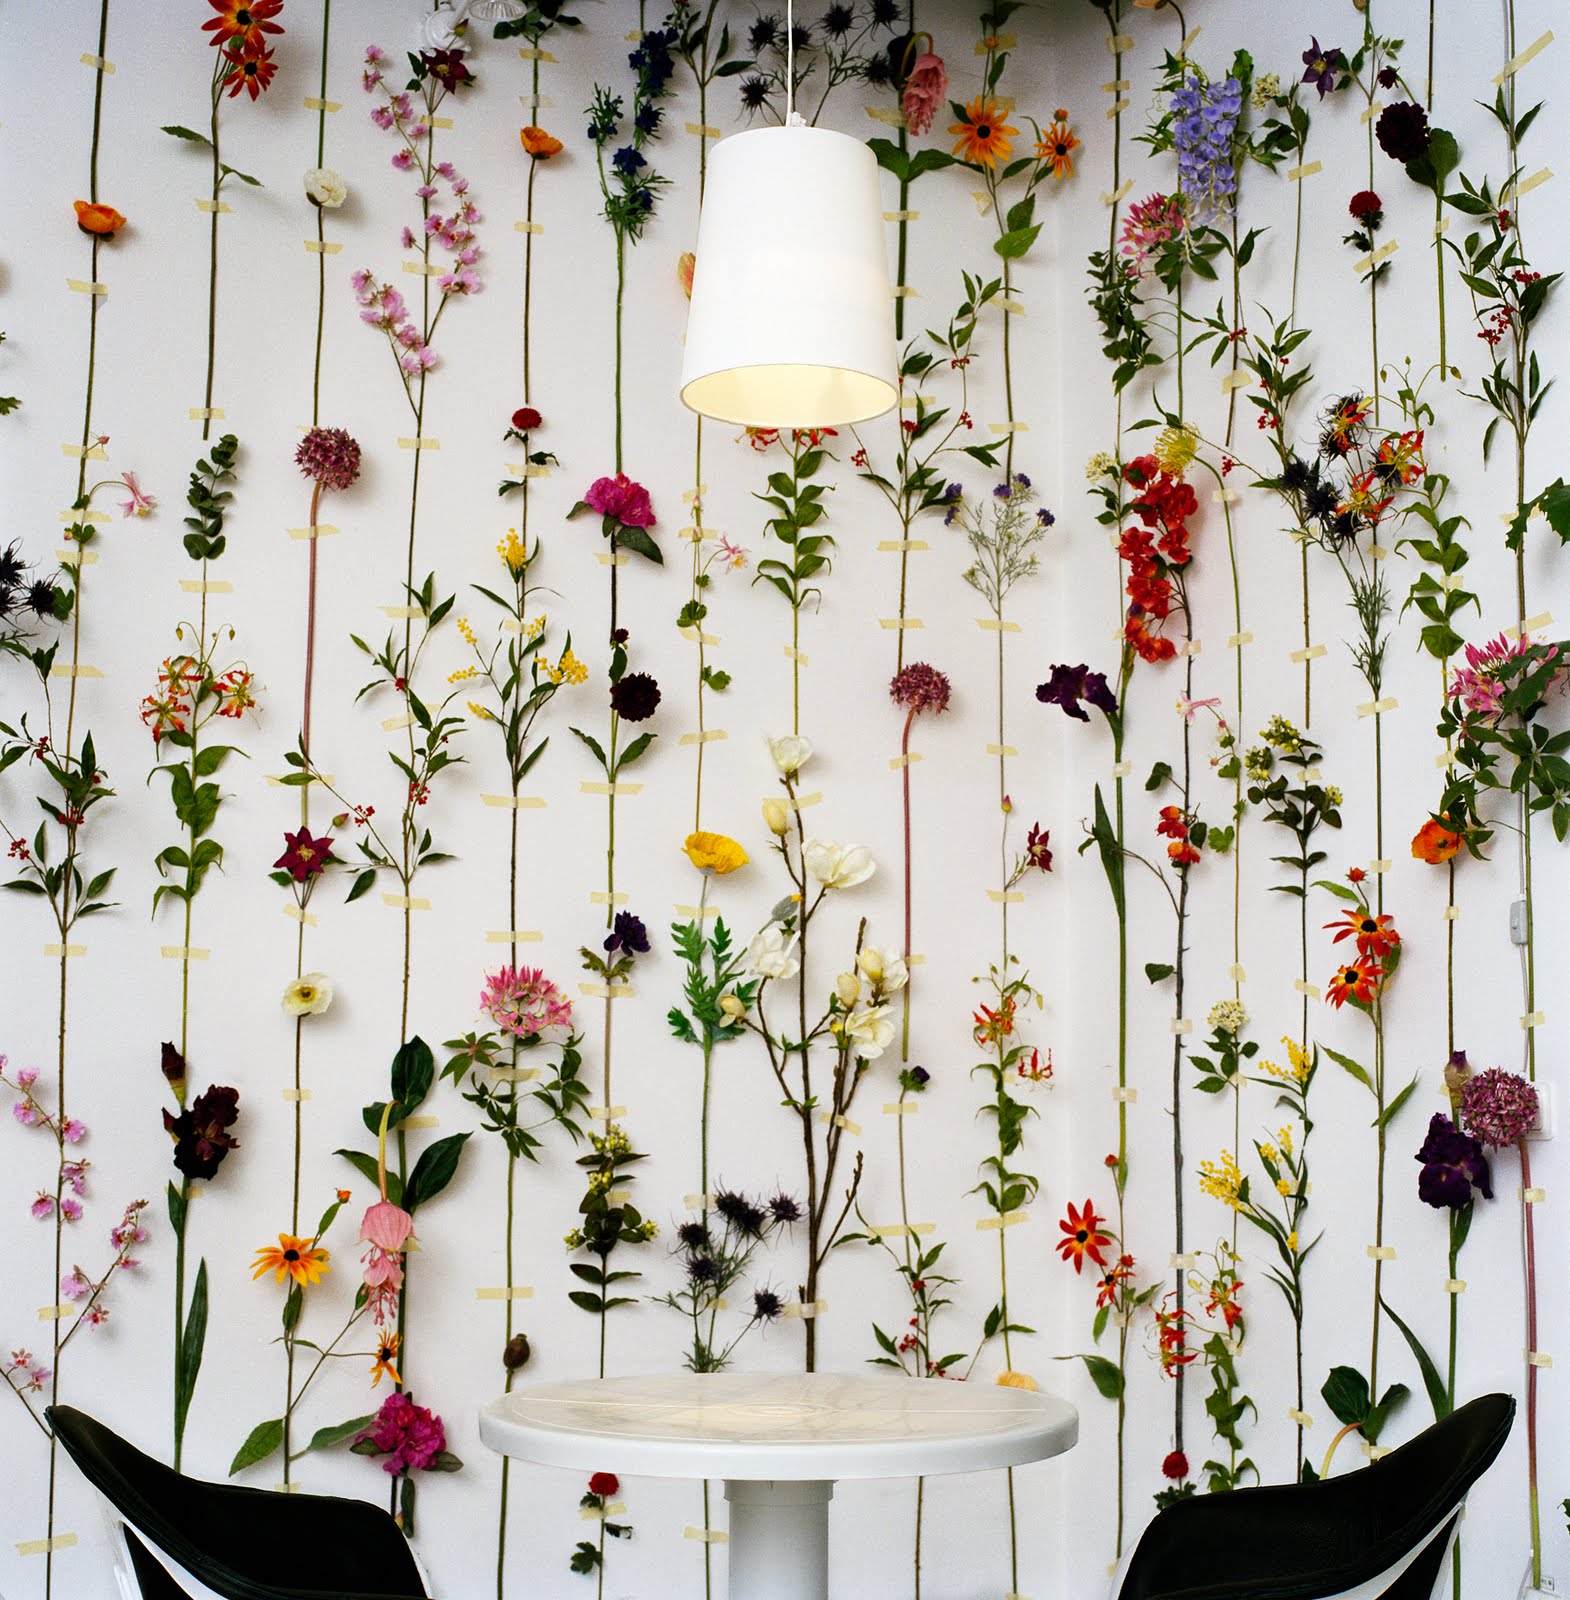 Decor Thoughts: Floral wall/background